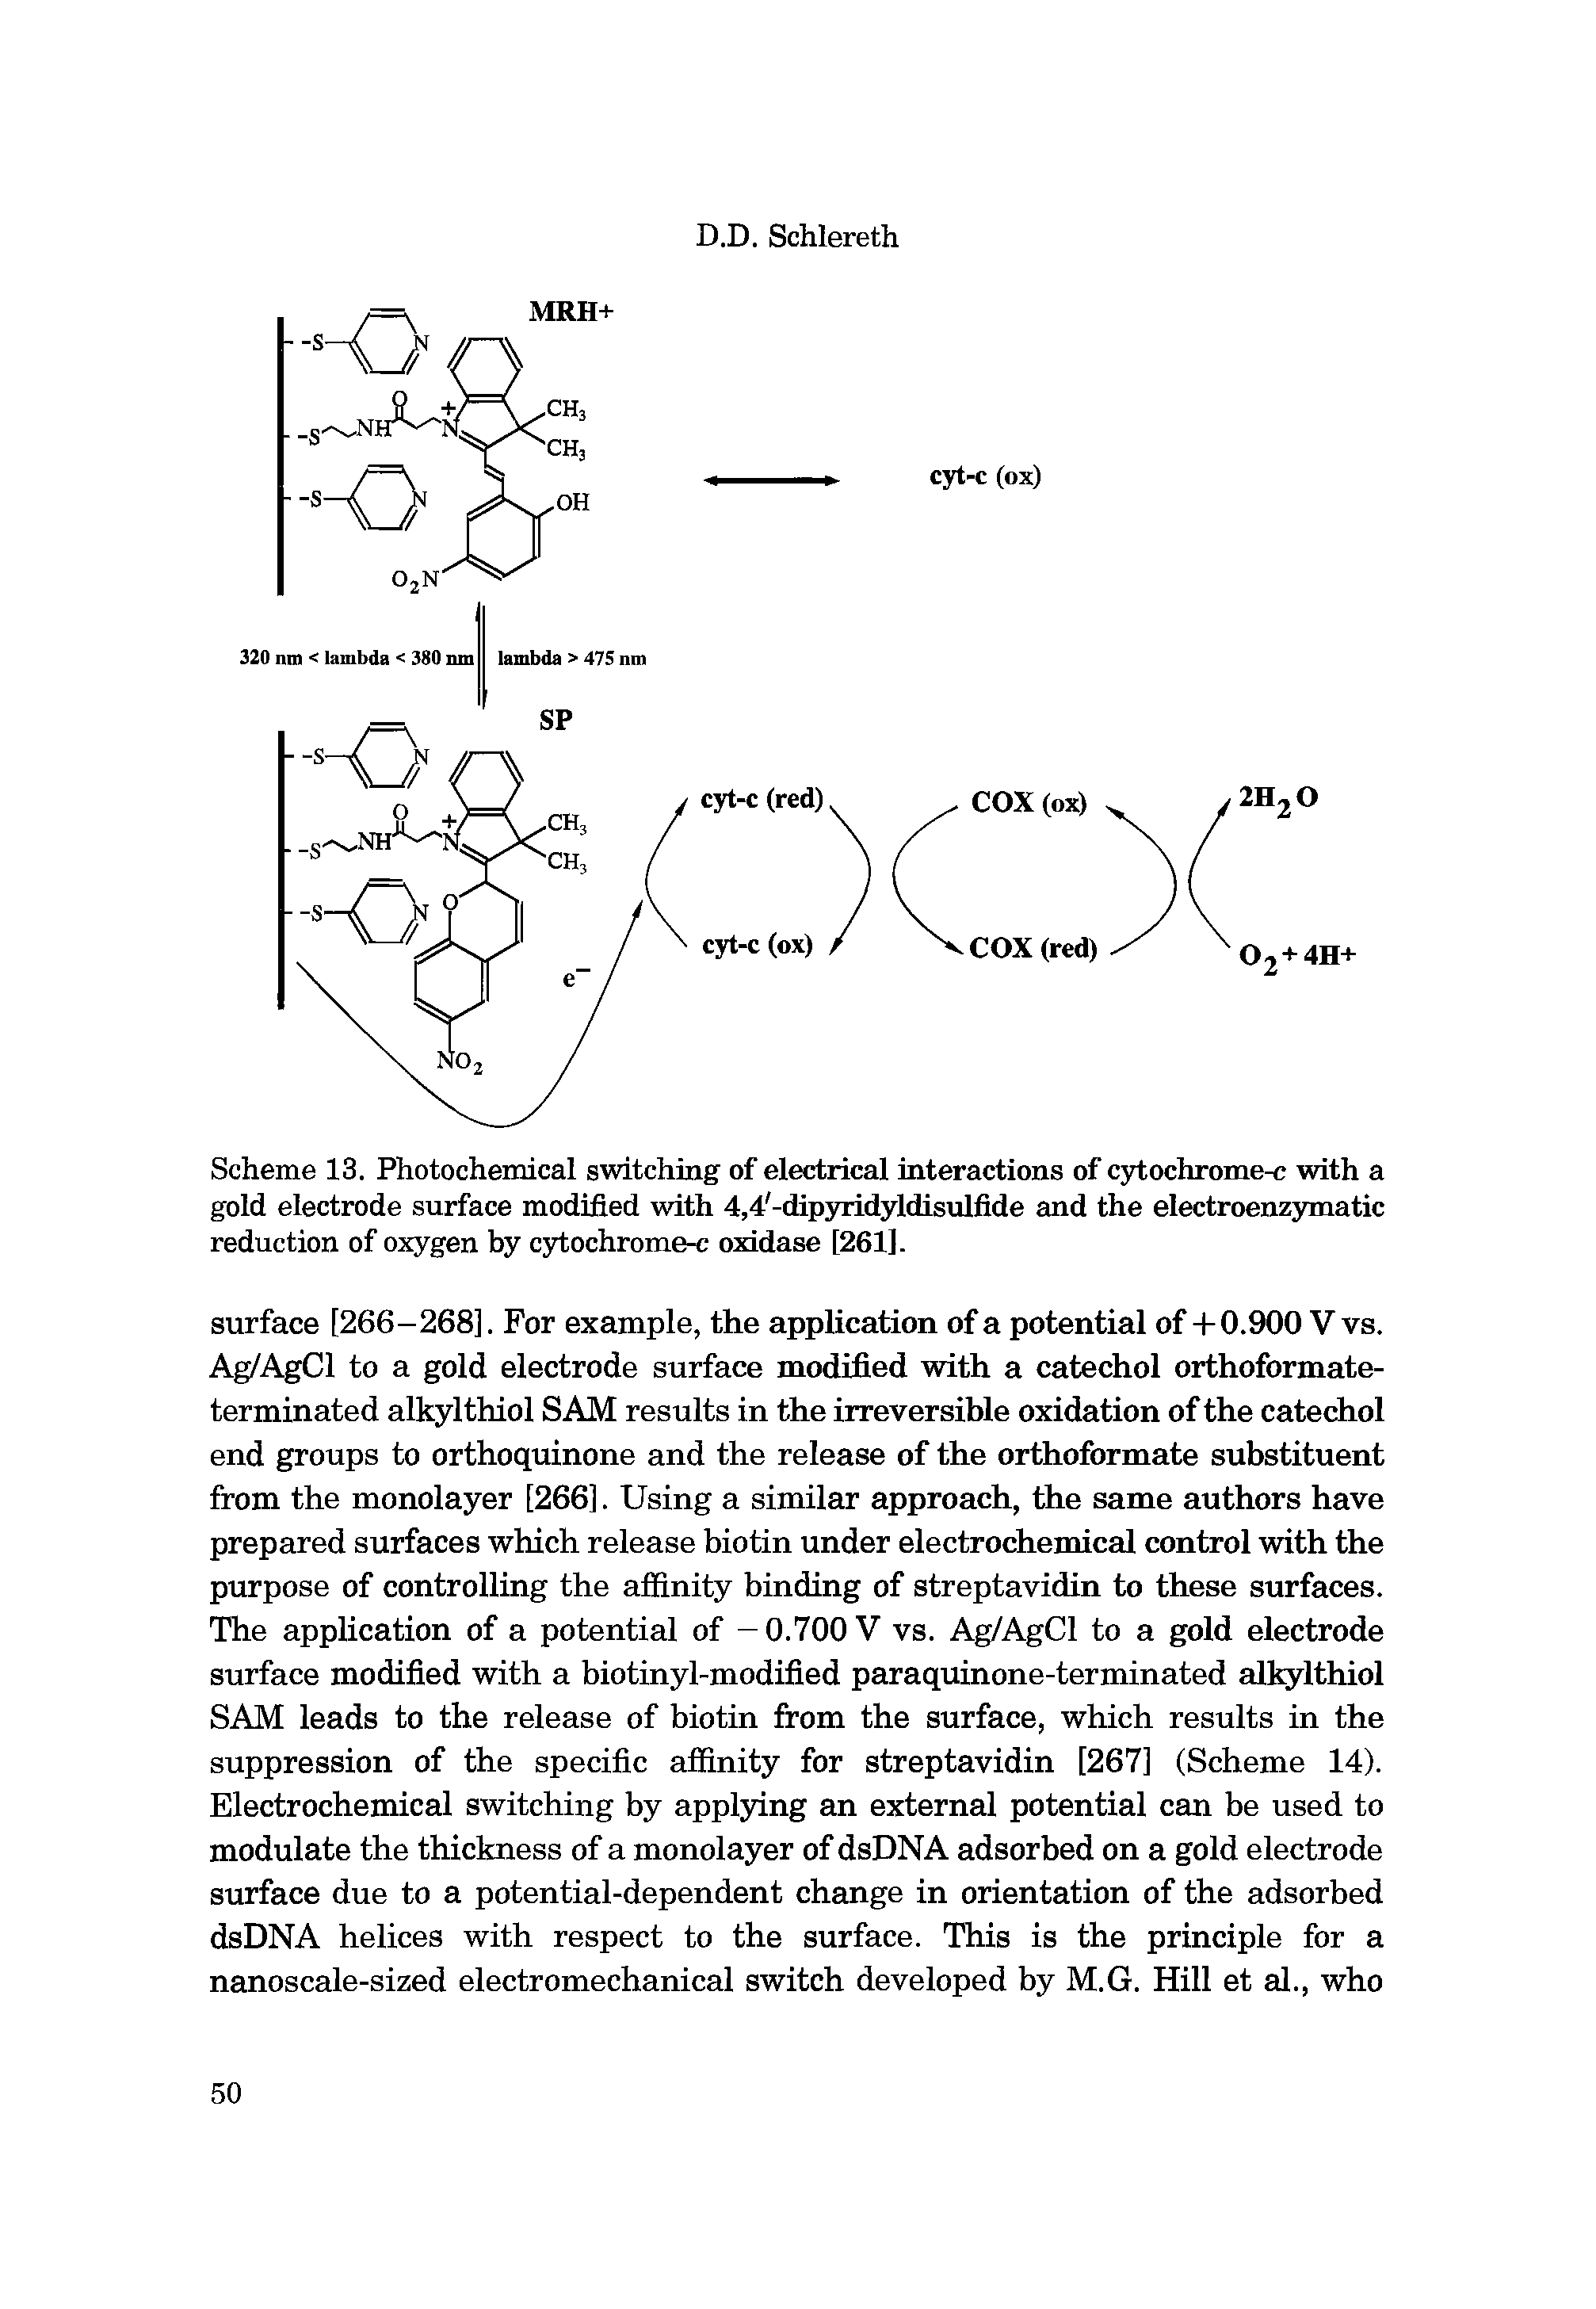 Scheme 13. Photochemical switching of electrical interactions of cytochrome-c with a gold electrode surface modified with 4,4 -dip3rridyldisulfide and the electroenz3maatic reduction of oxygen by c3dochrome-c oxidase [261].